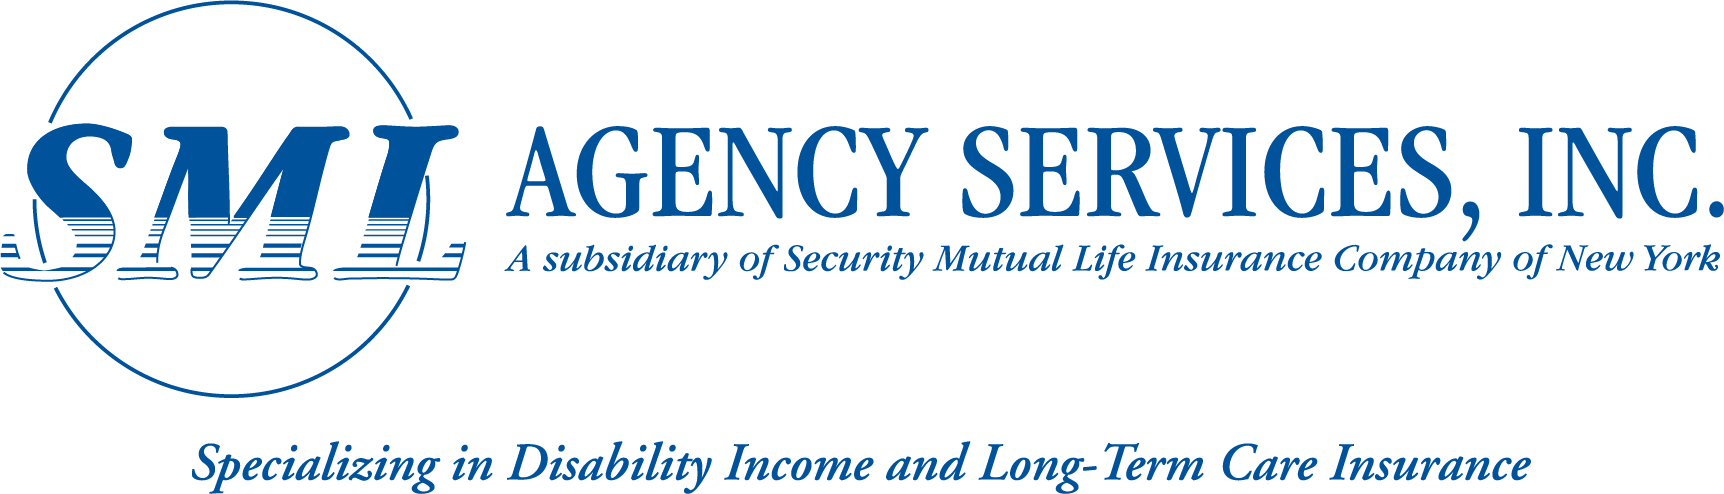 SML Agency Services